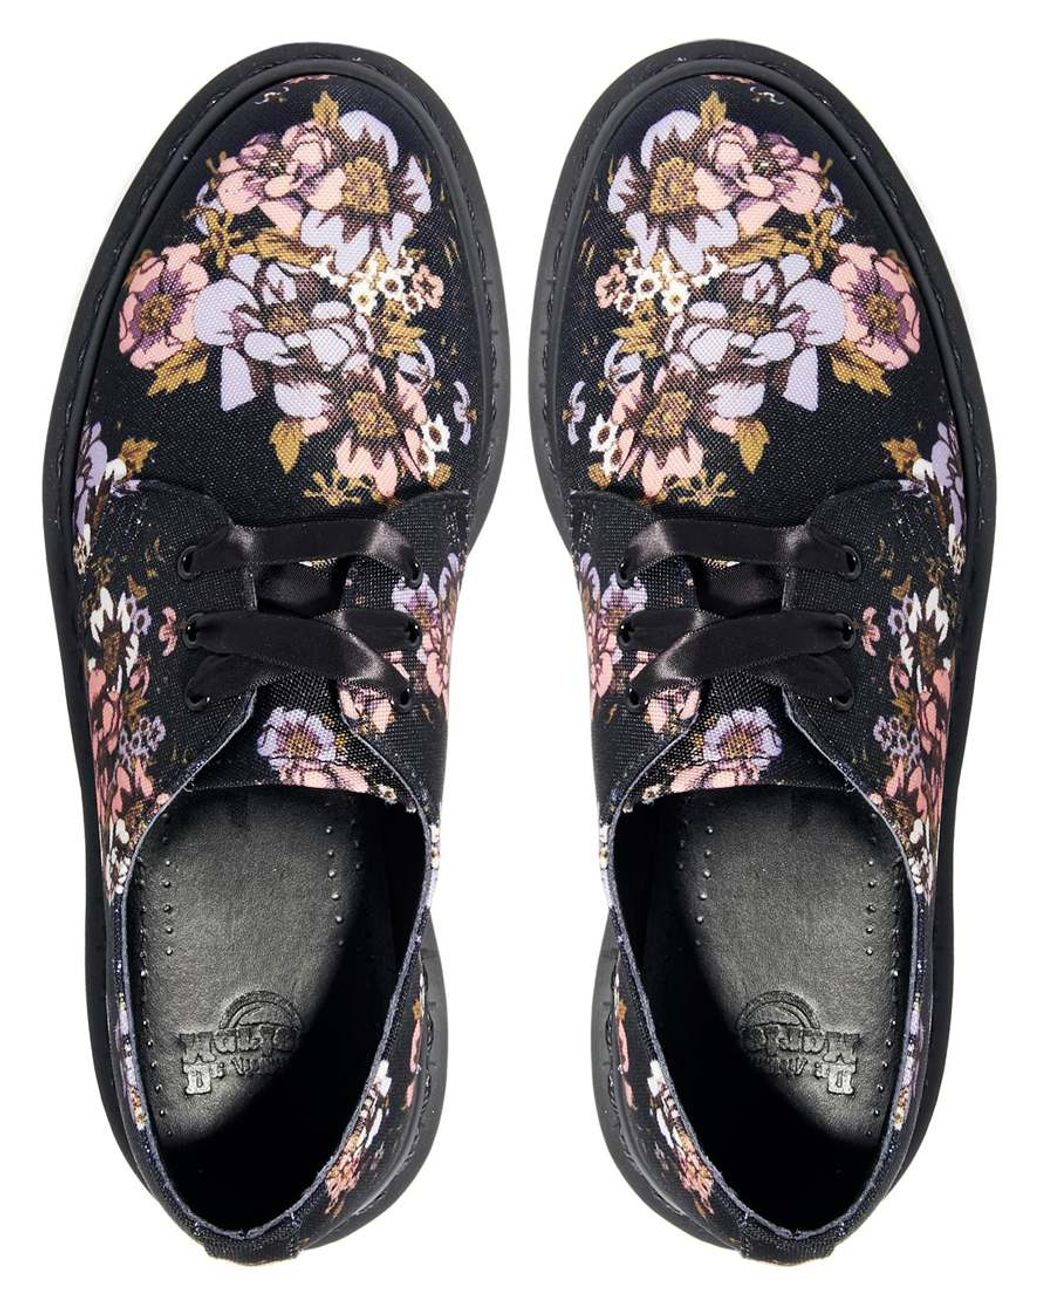 Dr. Martens Core Lester Black Wild Rose 3eye Shoes in Pink | Lyst